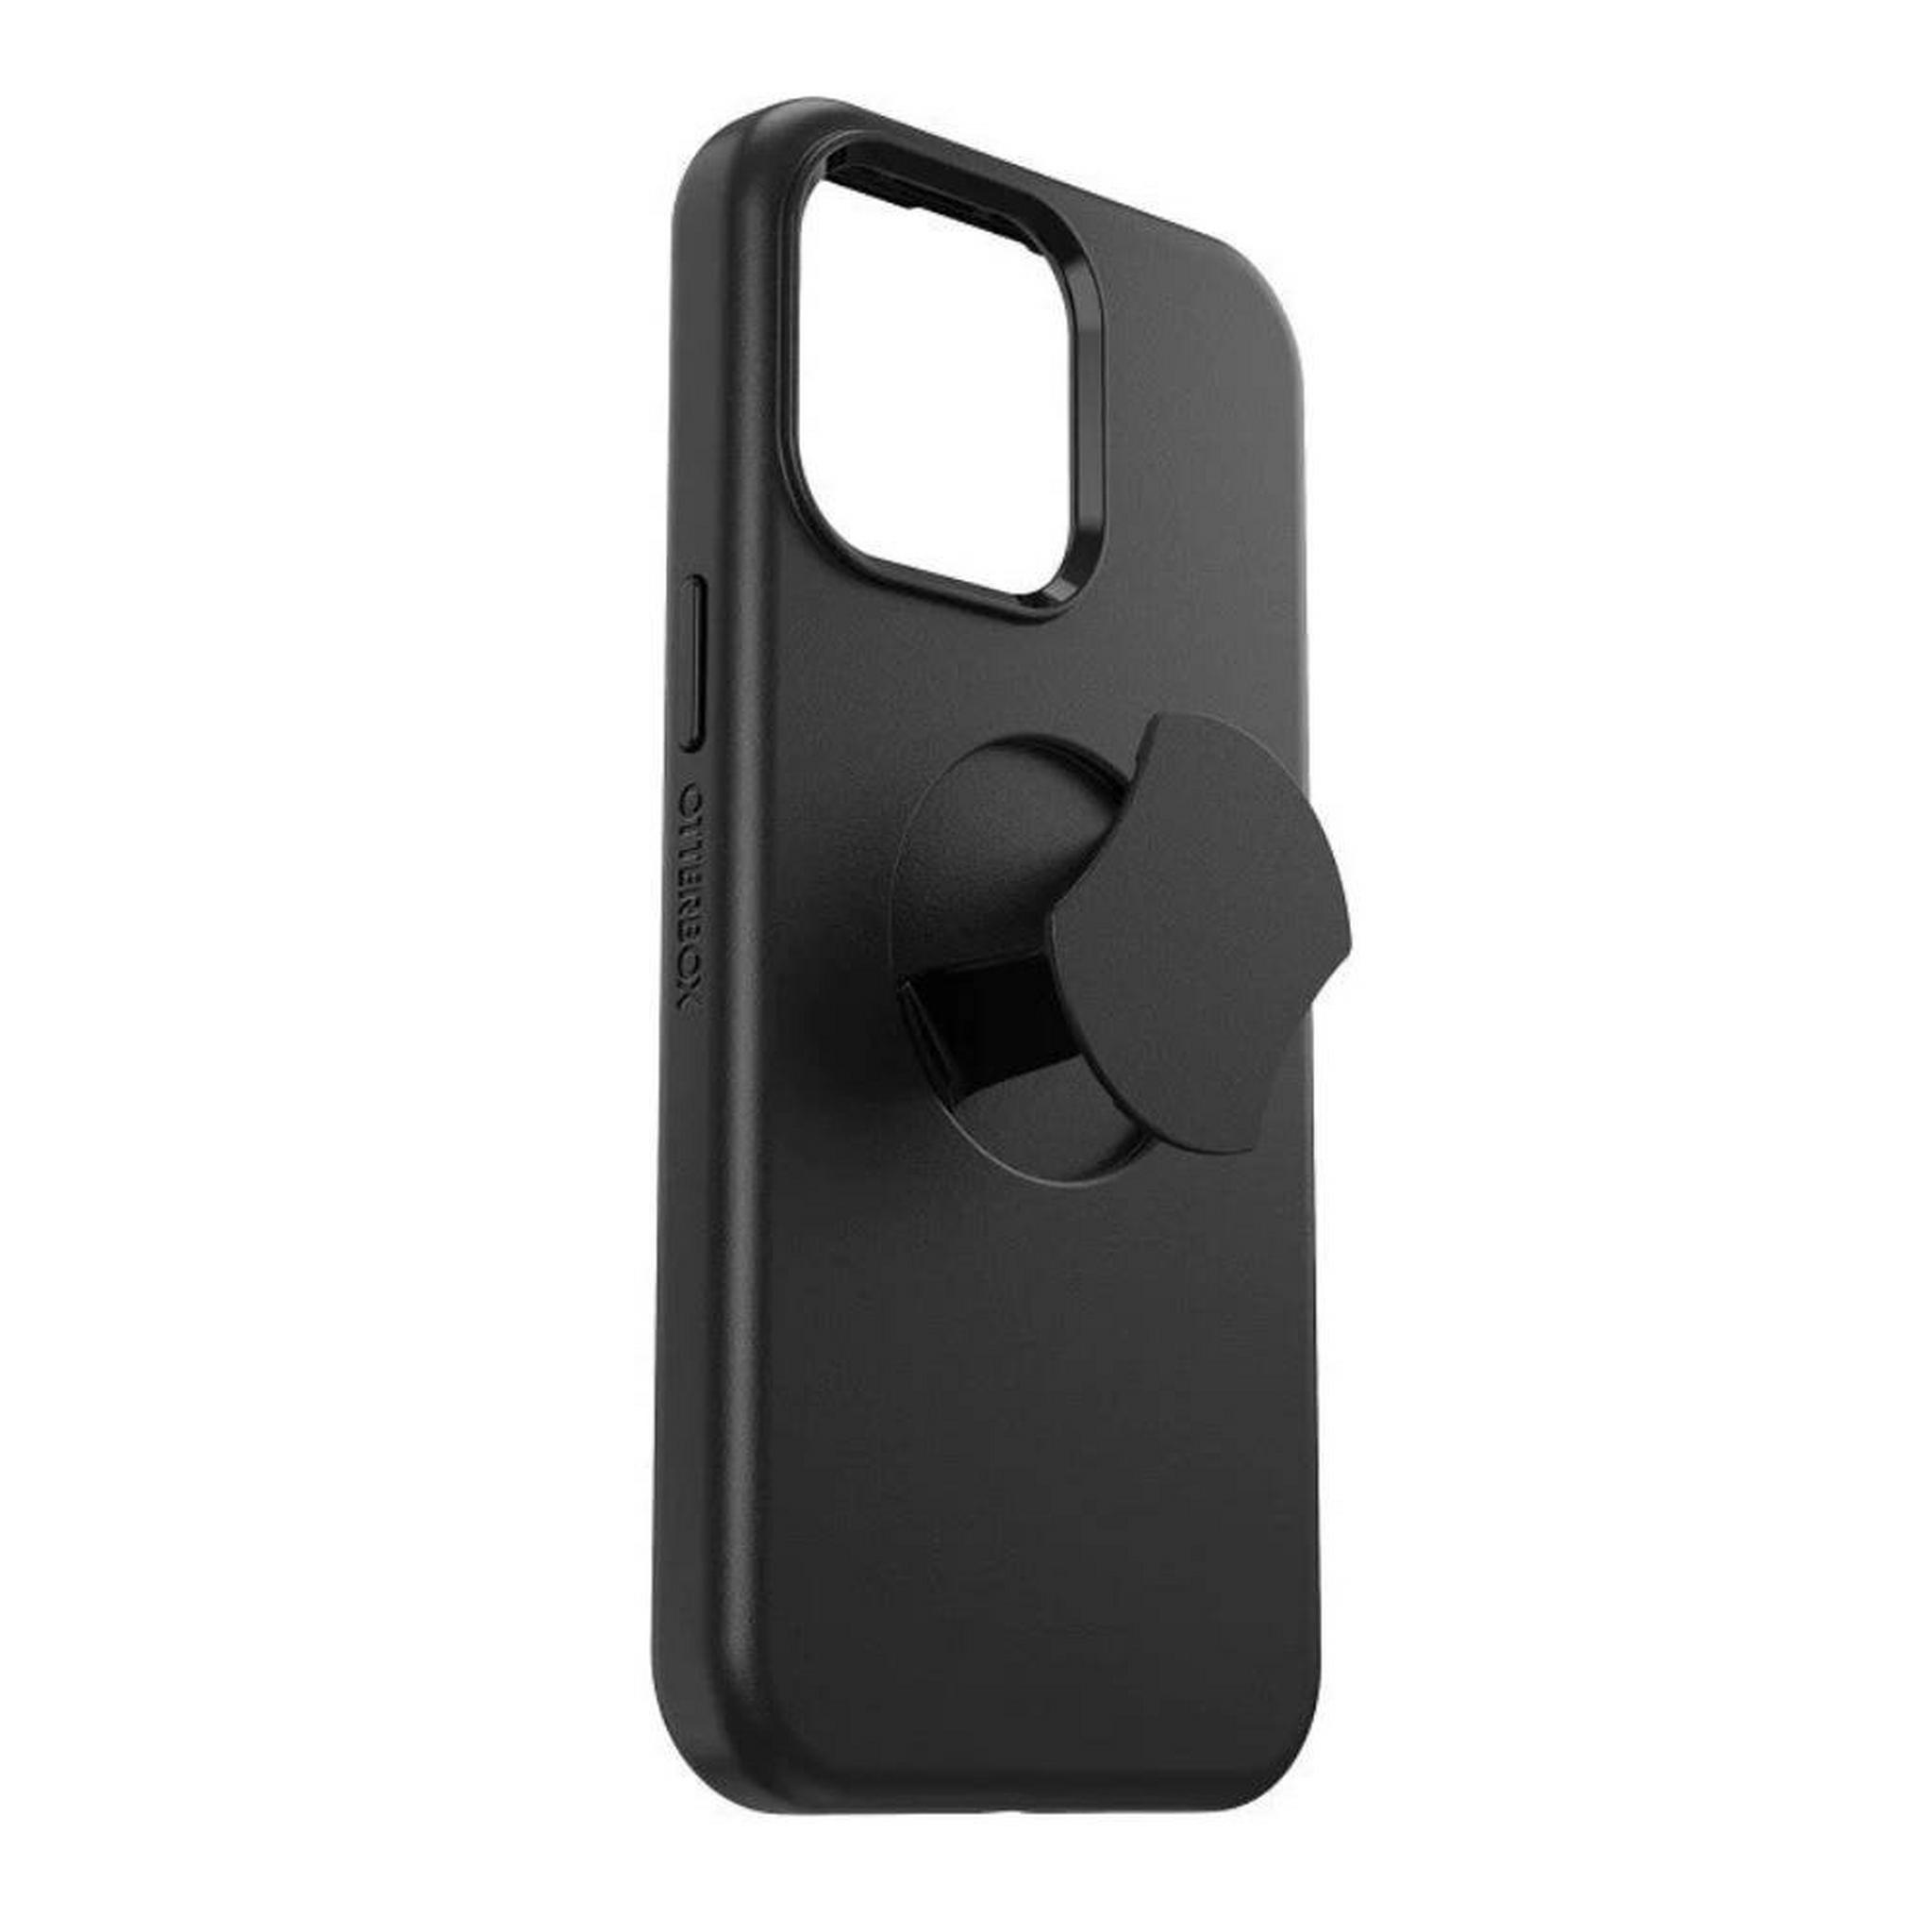 OTTERBOX OtterGrip Symmetry Case for 6.7-inch iPhone 15 Pro Max, 77-93170 – Black